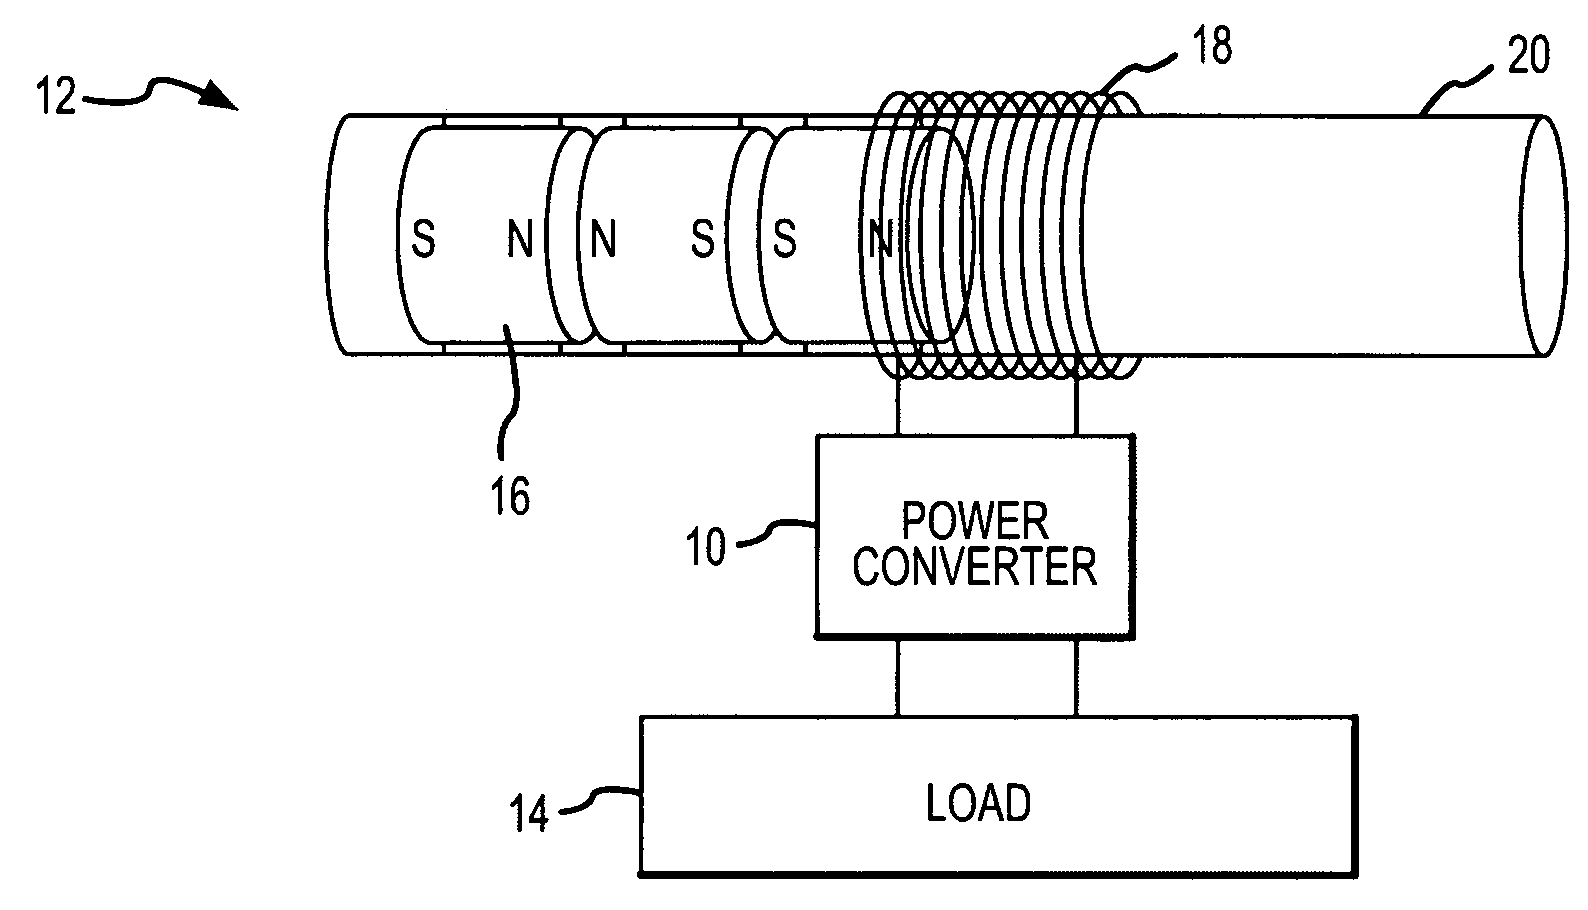 High efficiency power converter for energy harvesting devices